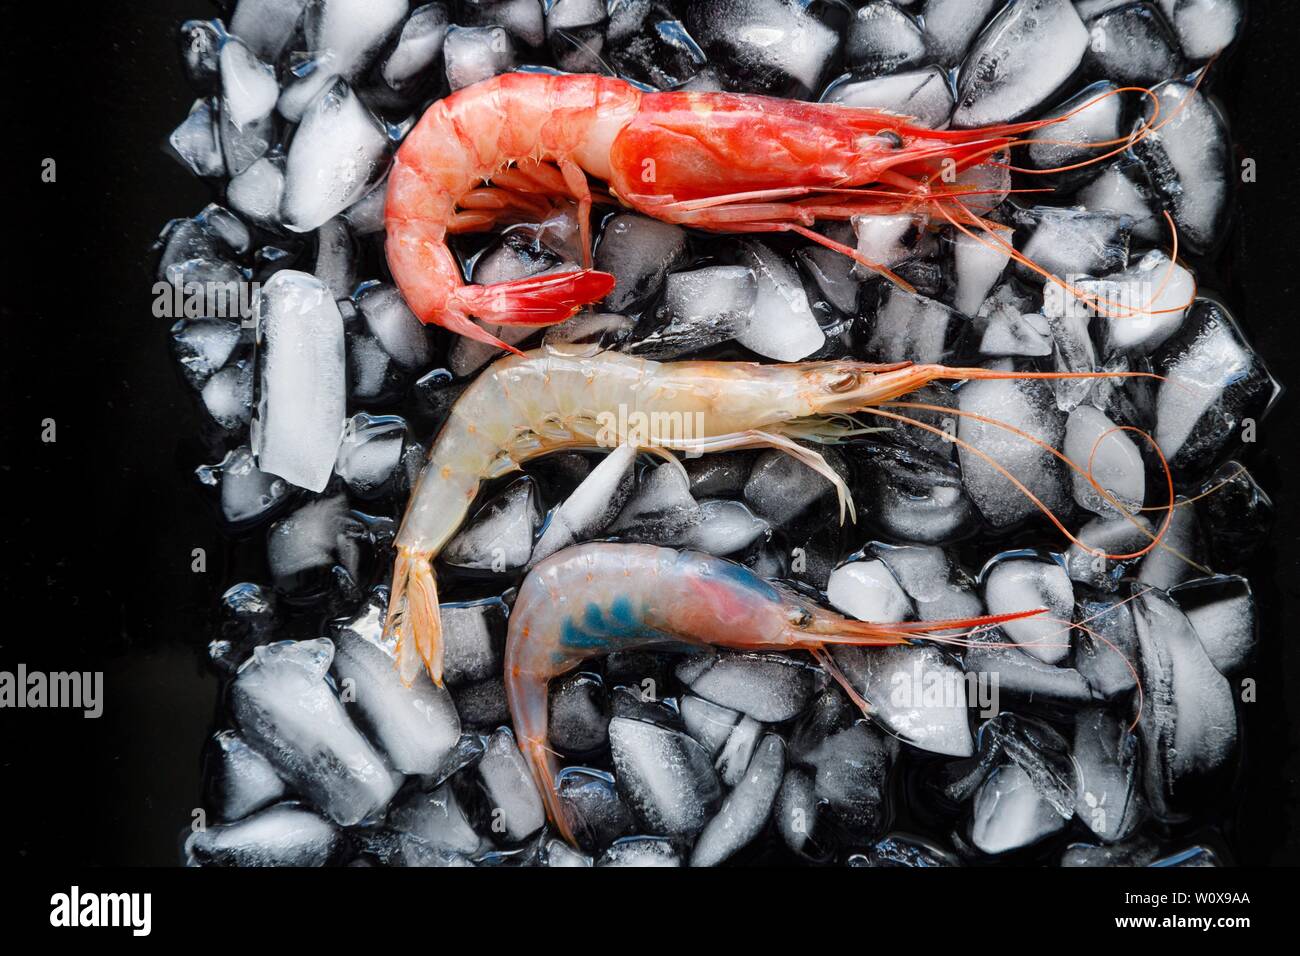 red prawn, white prawn and shrimp on a crushed ice bed with black background Stock Photo